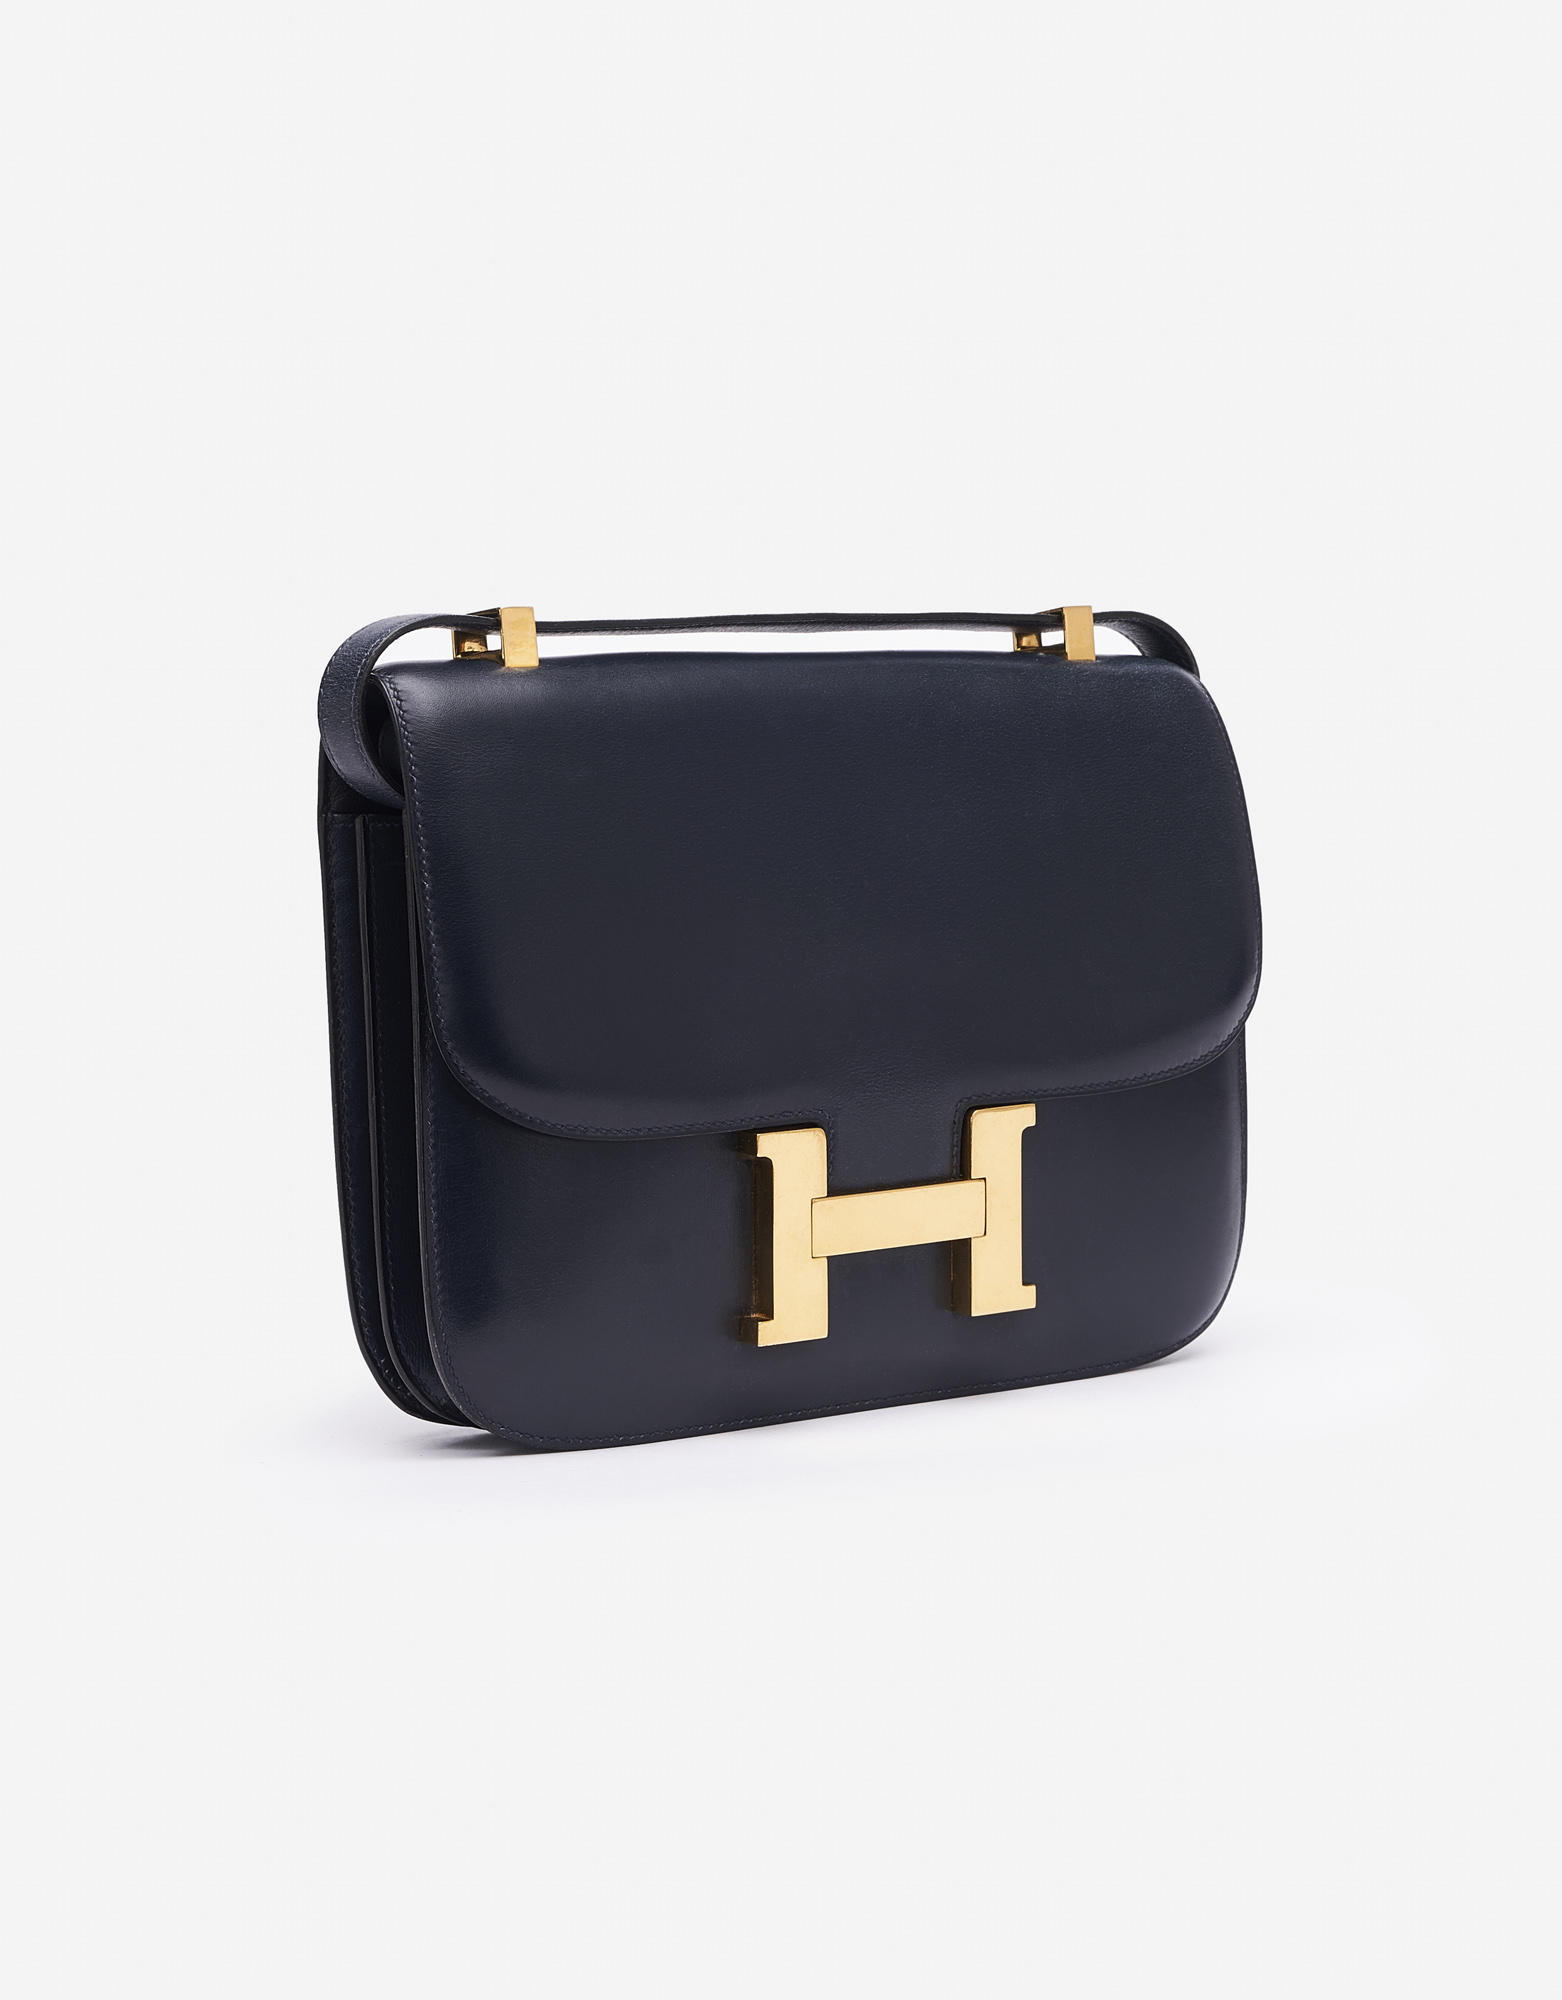 Lot - HERMES NAVY CALF BOX LEATHER CONSTANCE BAG, 1987 7 x 9 x 2 in. (17.8  x 22.9 x 5.1 cm.)